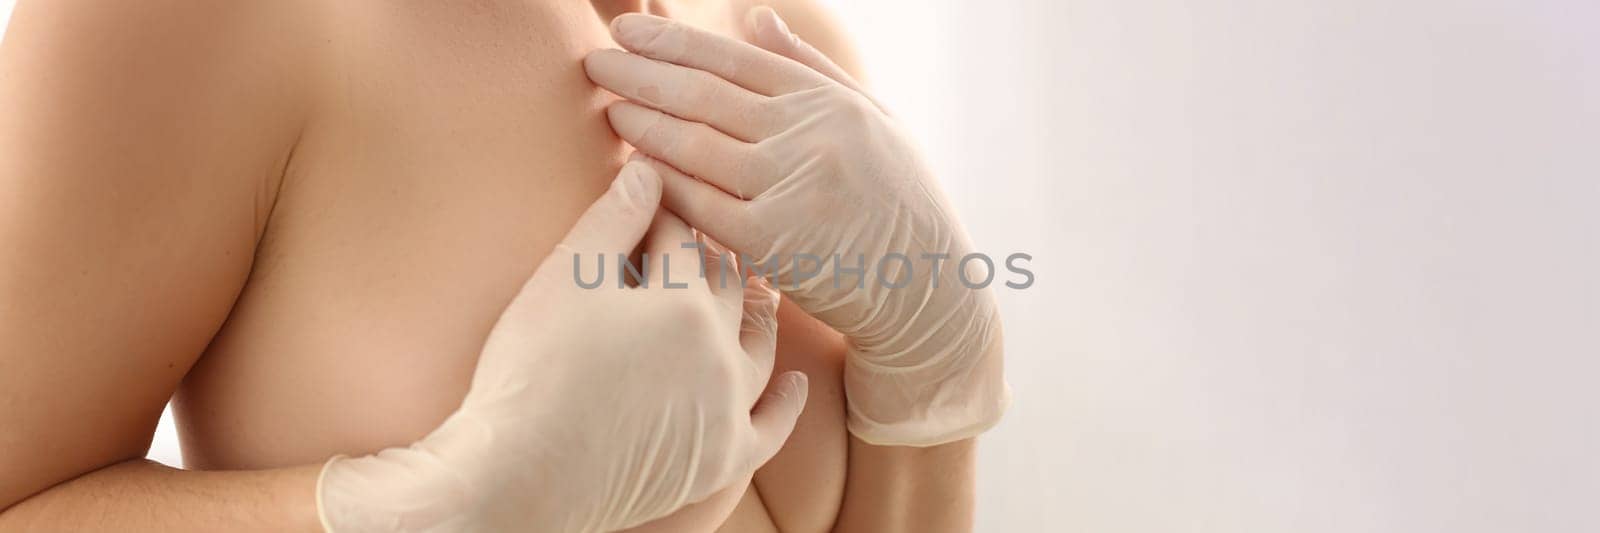 Breast cancer and healthcare. Young woman with slim hot body holding breasts with hands on white background.